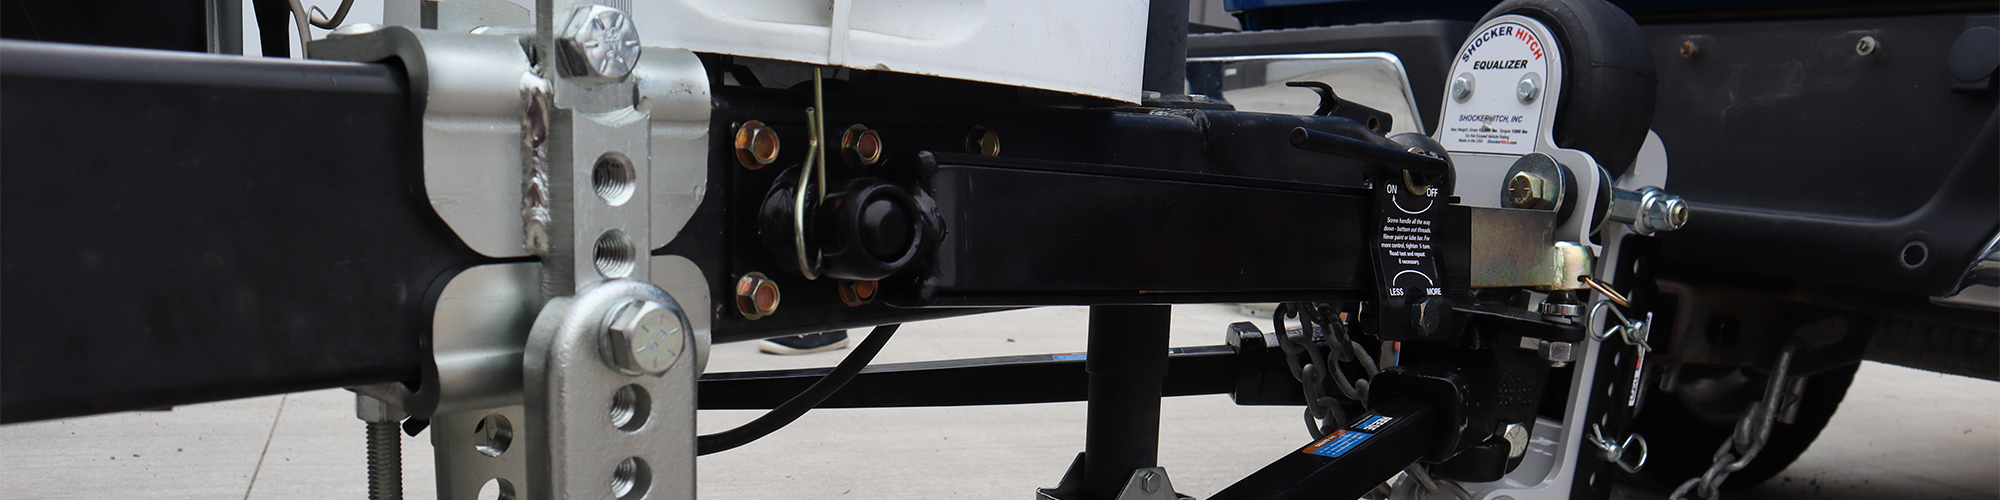 Air Equalizers
For Weight-Distribution Hitches